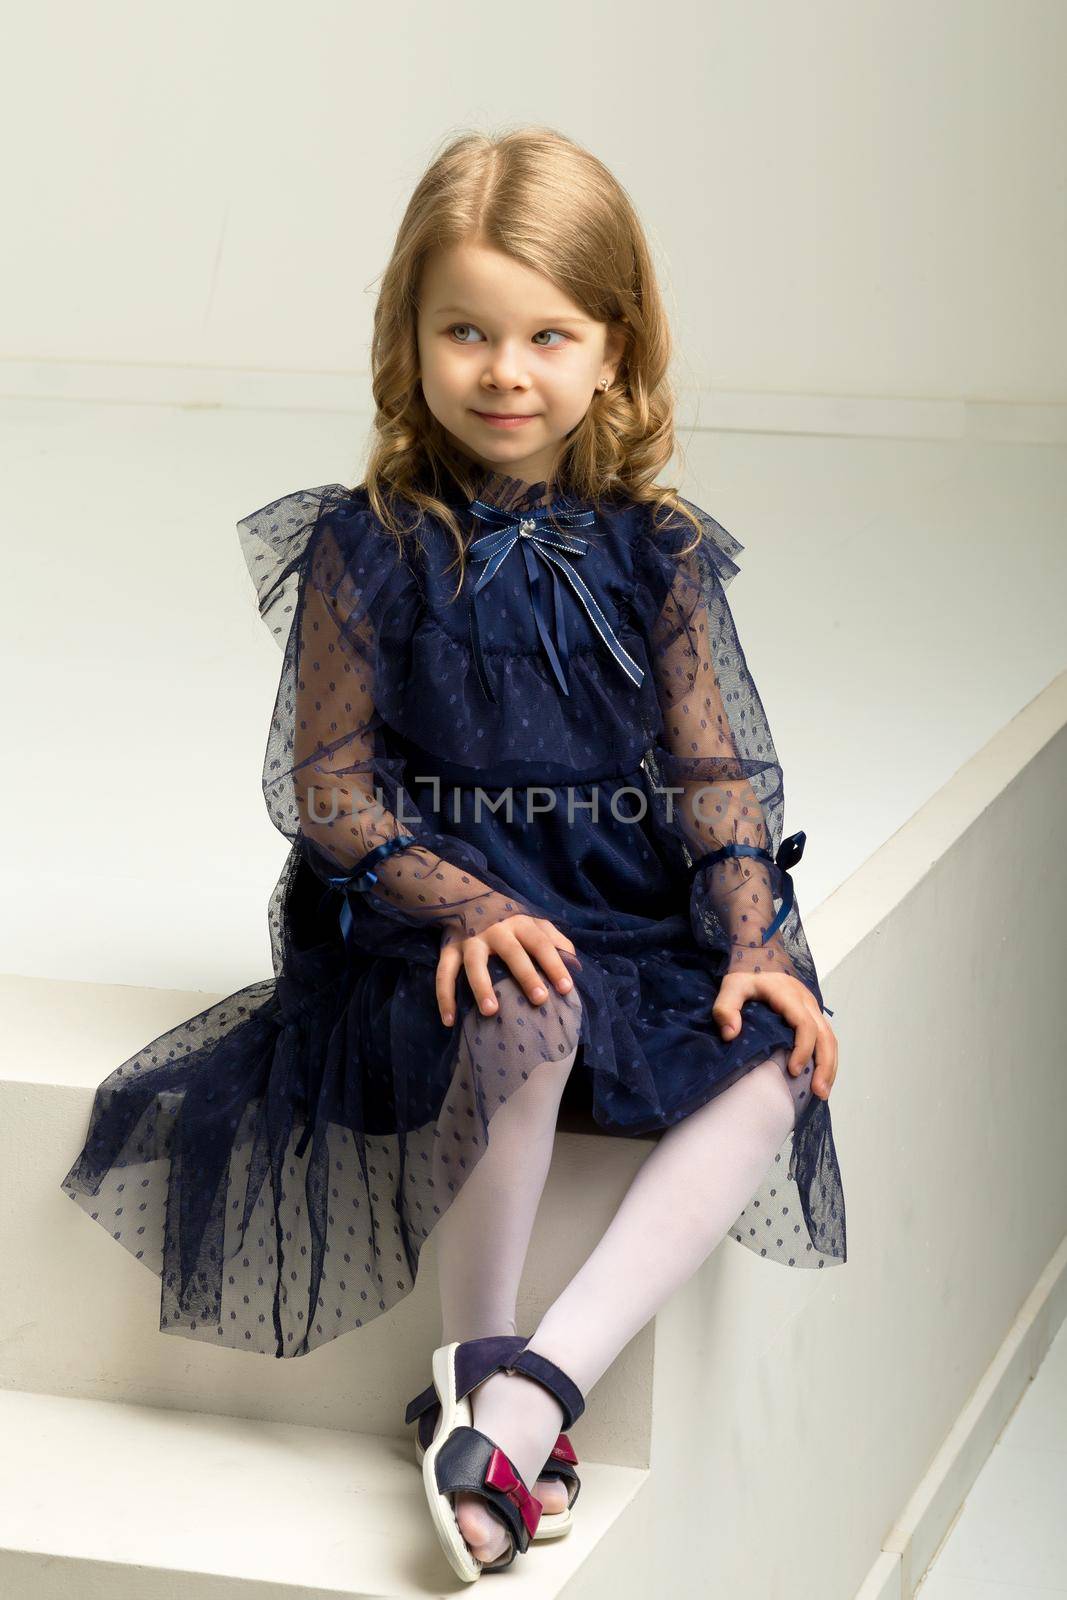 Lovely girl in a blue dress sitting on a white stairs. Portrait of a charming blonde in a beautiful lace dress sits and looks at the camera